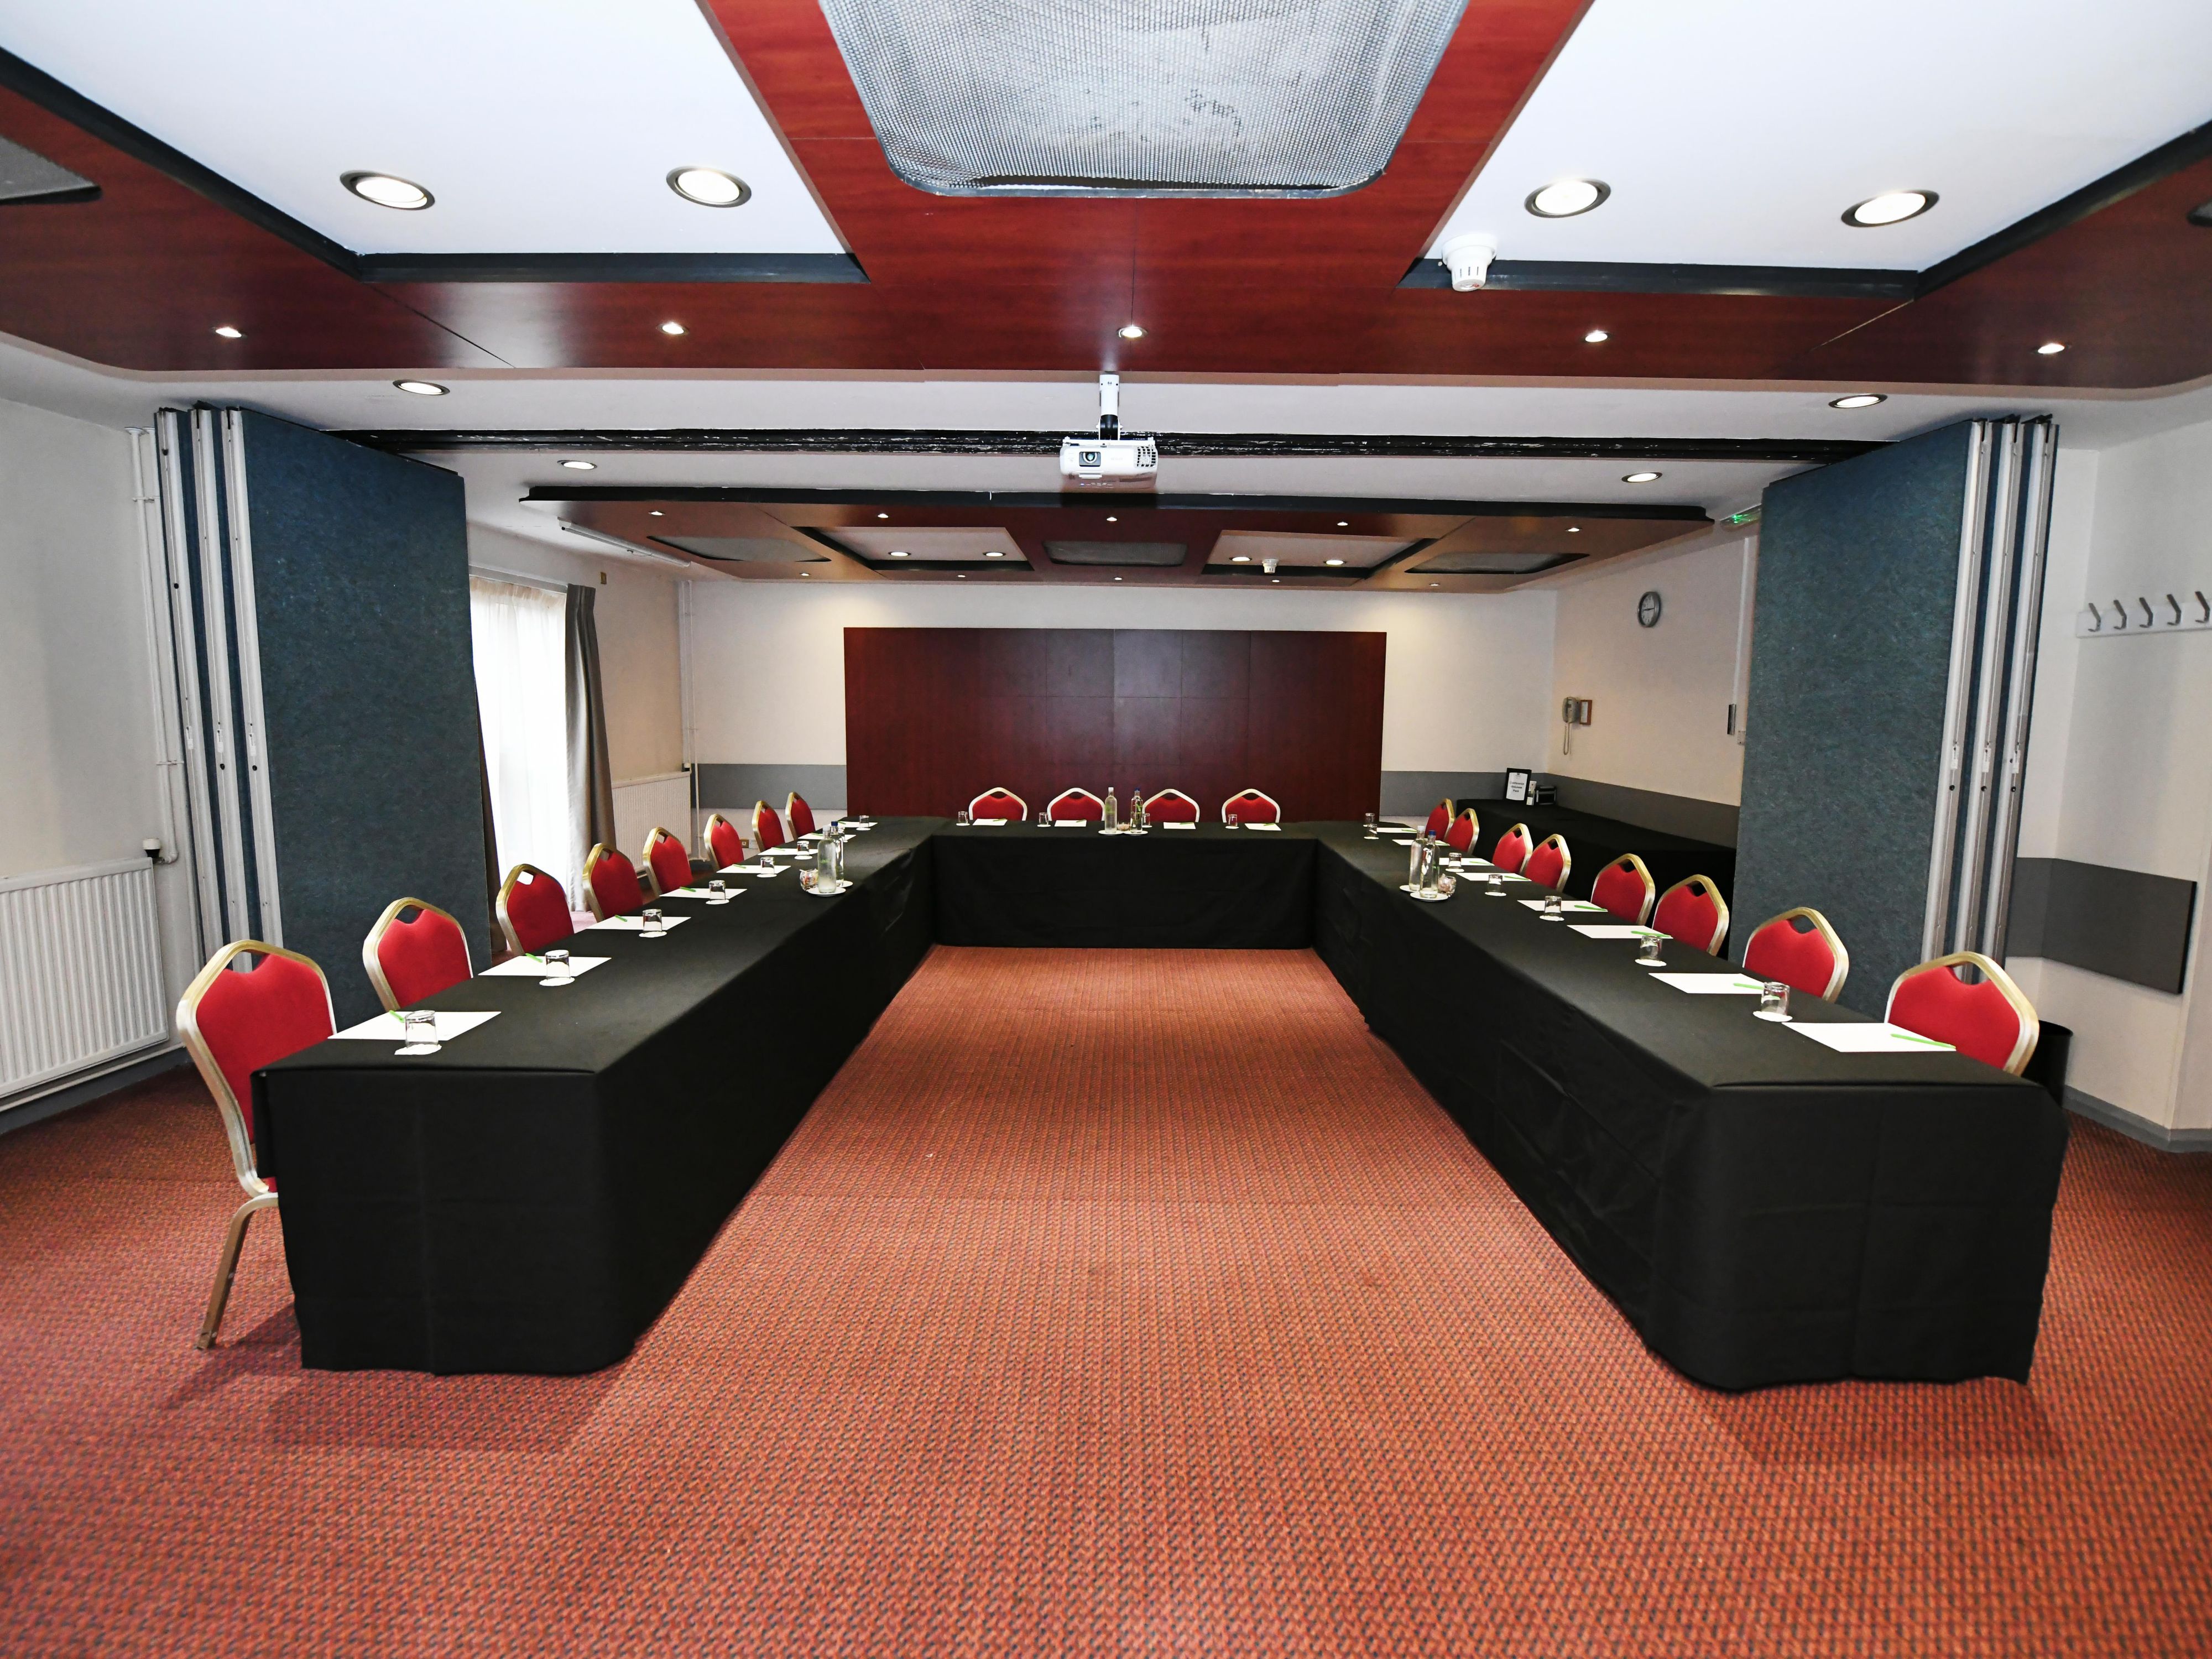 We have 8 versatile conference rooms, air conditioned with natural daylight and WiFi.  A dedicated event planner will assist with planning to ensure your event is a success.  Whether you are holding a training course, product launch, seminar or a wedding, we have the facilities and experience you need. 